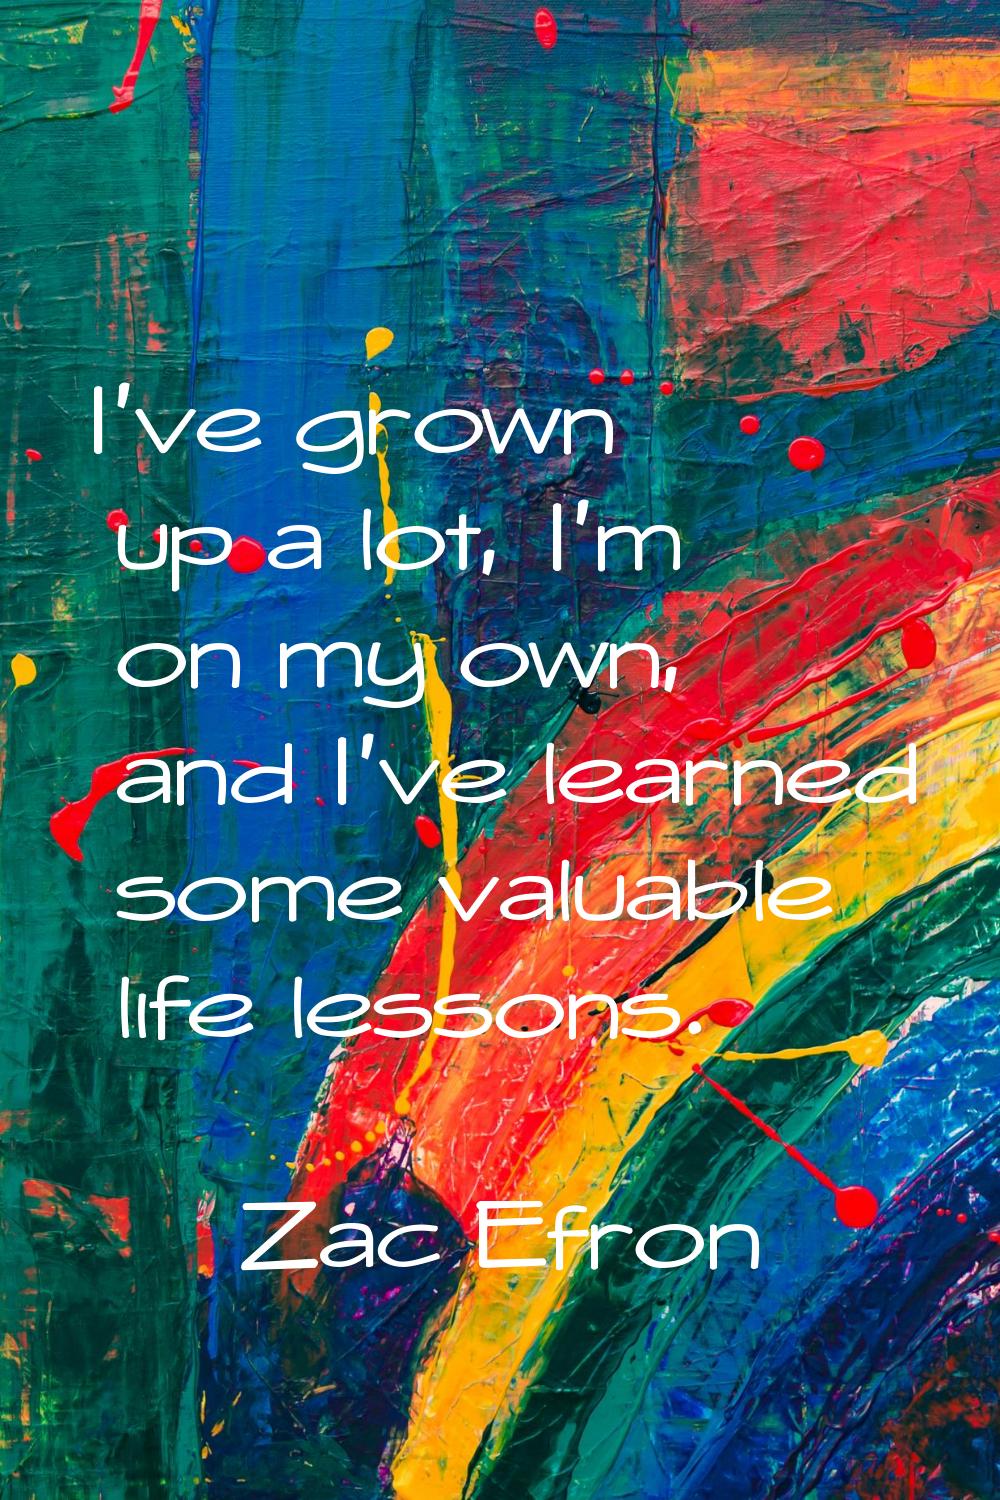 I've grown up a lot, I'm on my own, and I've learned some valuable life lessons.